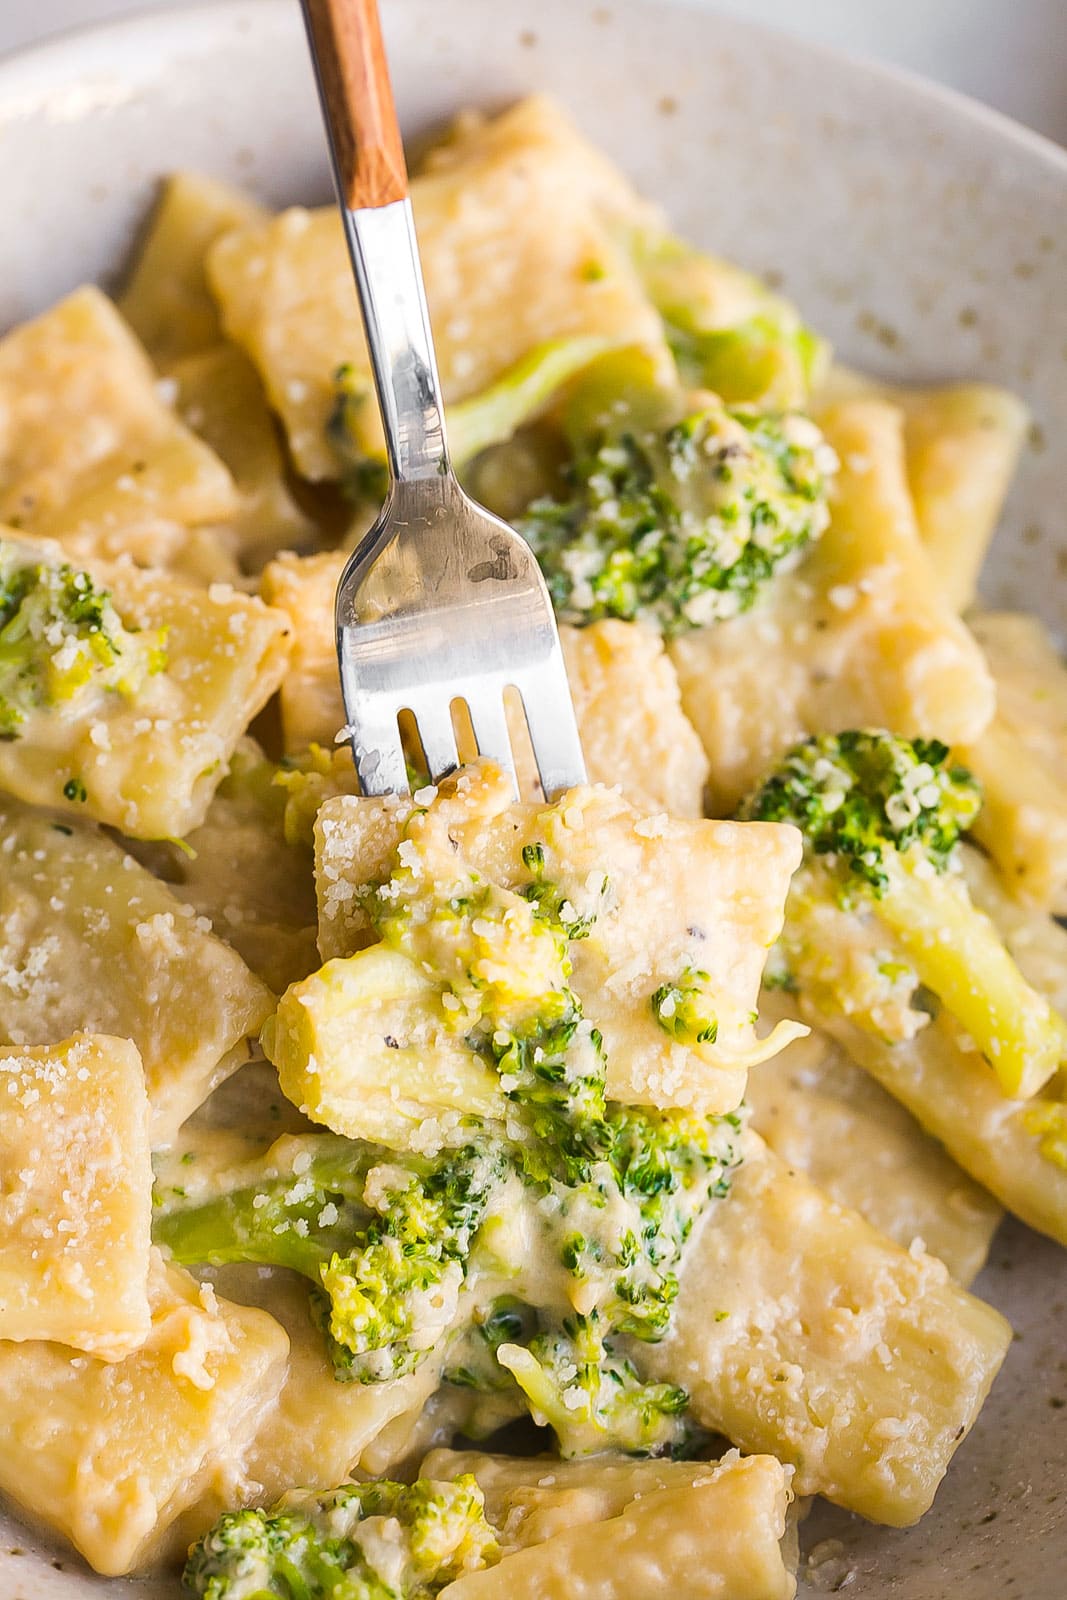 Cheesy pasta with broccoli on a fork.